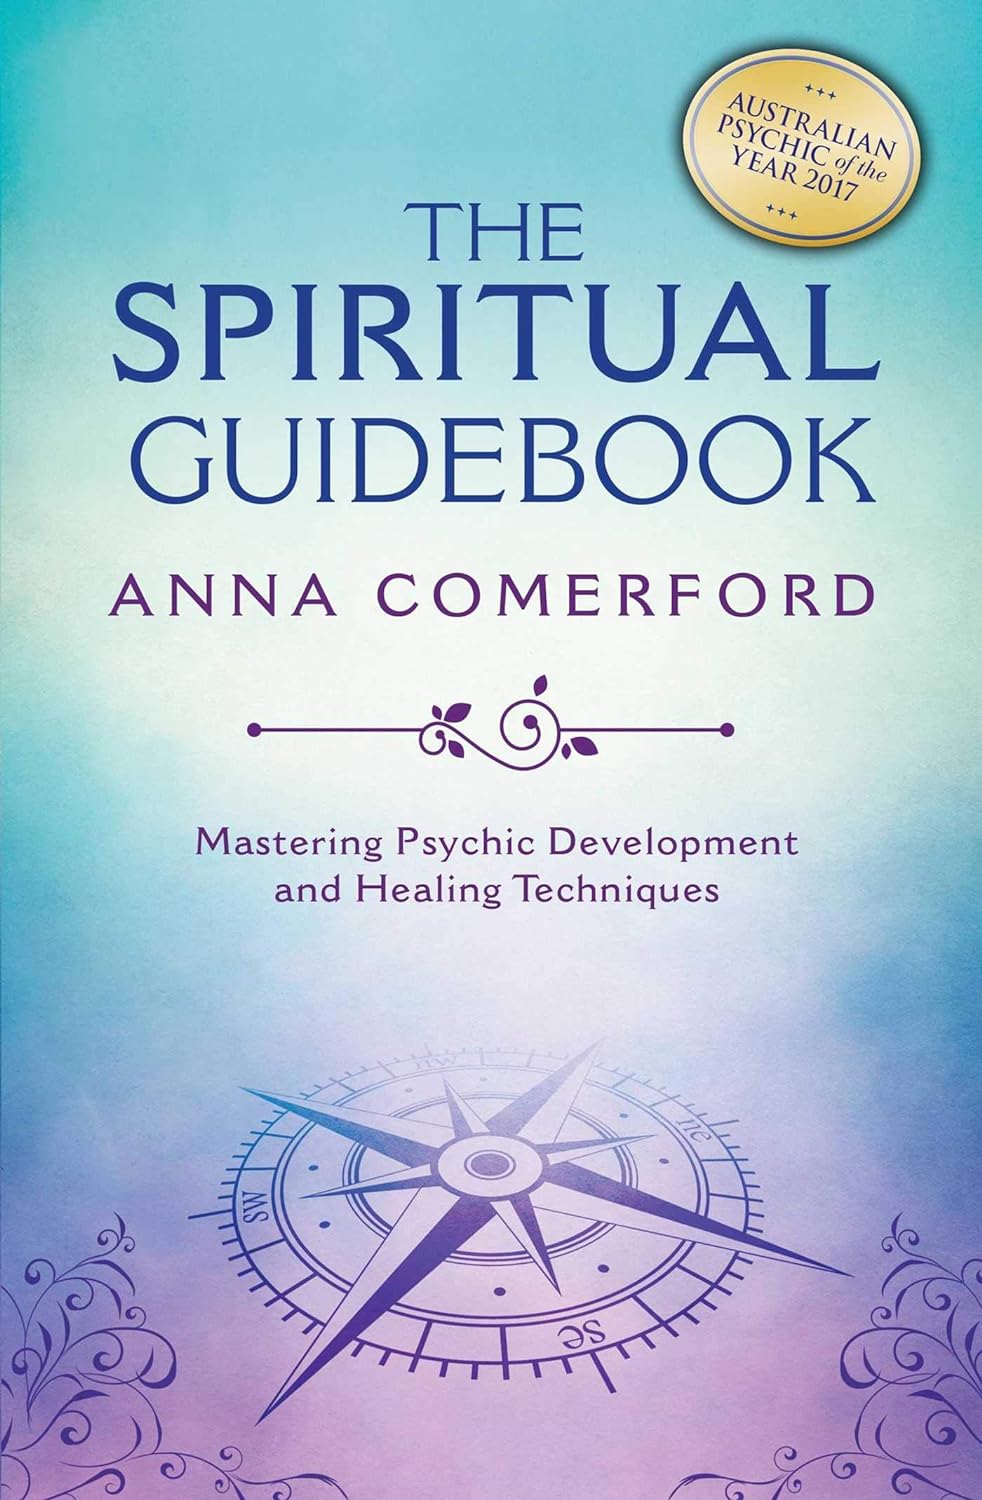 The Spiritual Guidebook: Mastering Psychic Development and Techniques